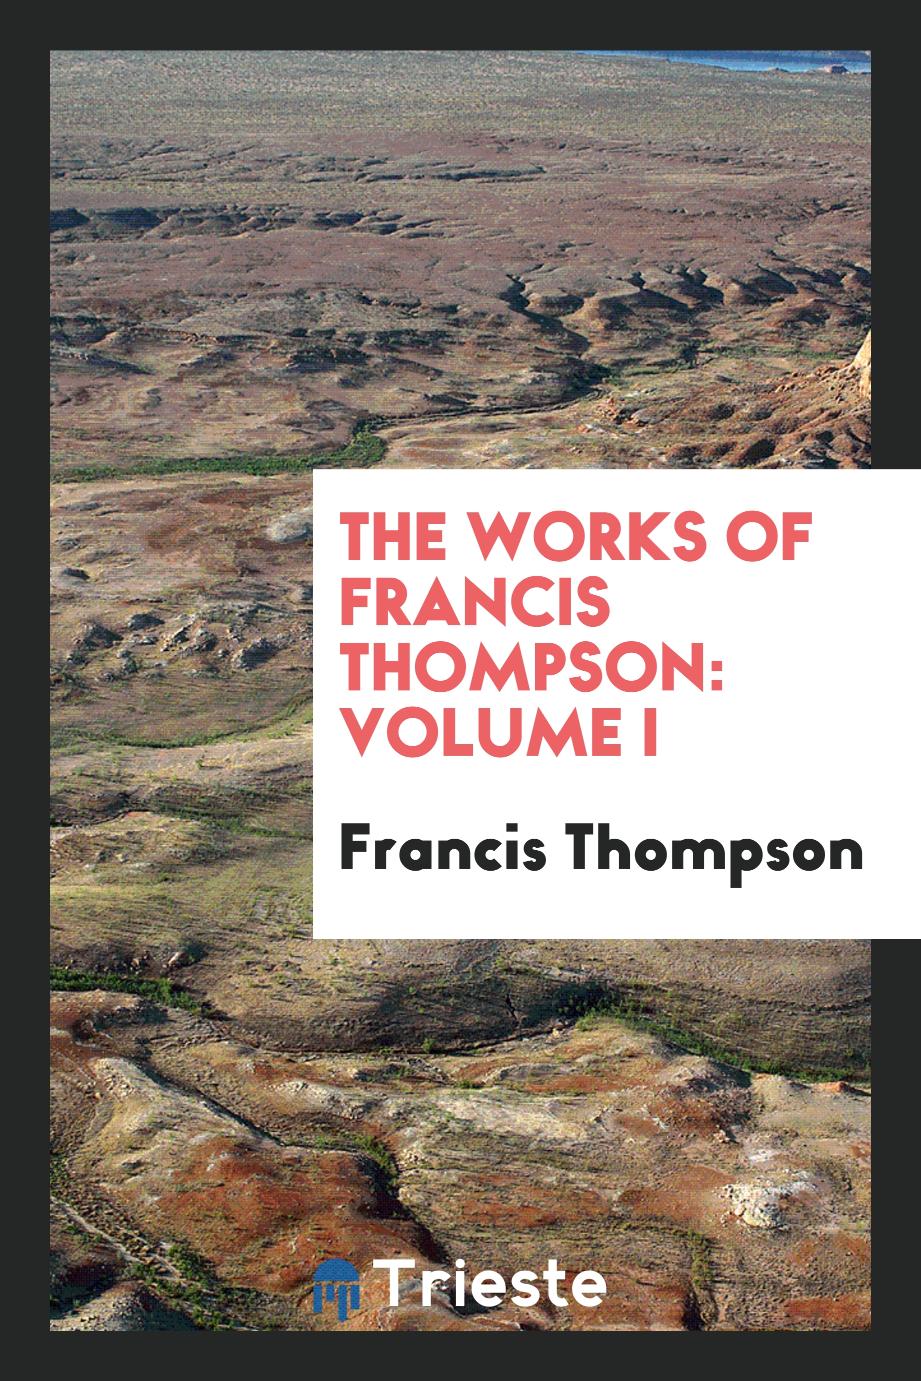 The works of Francis Thompson: Volume I